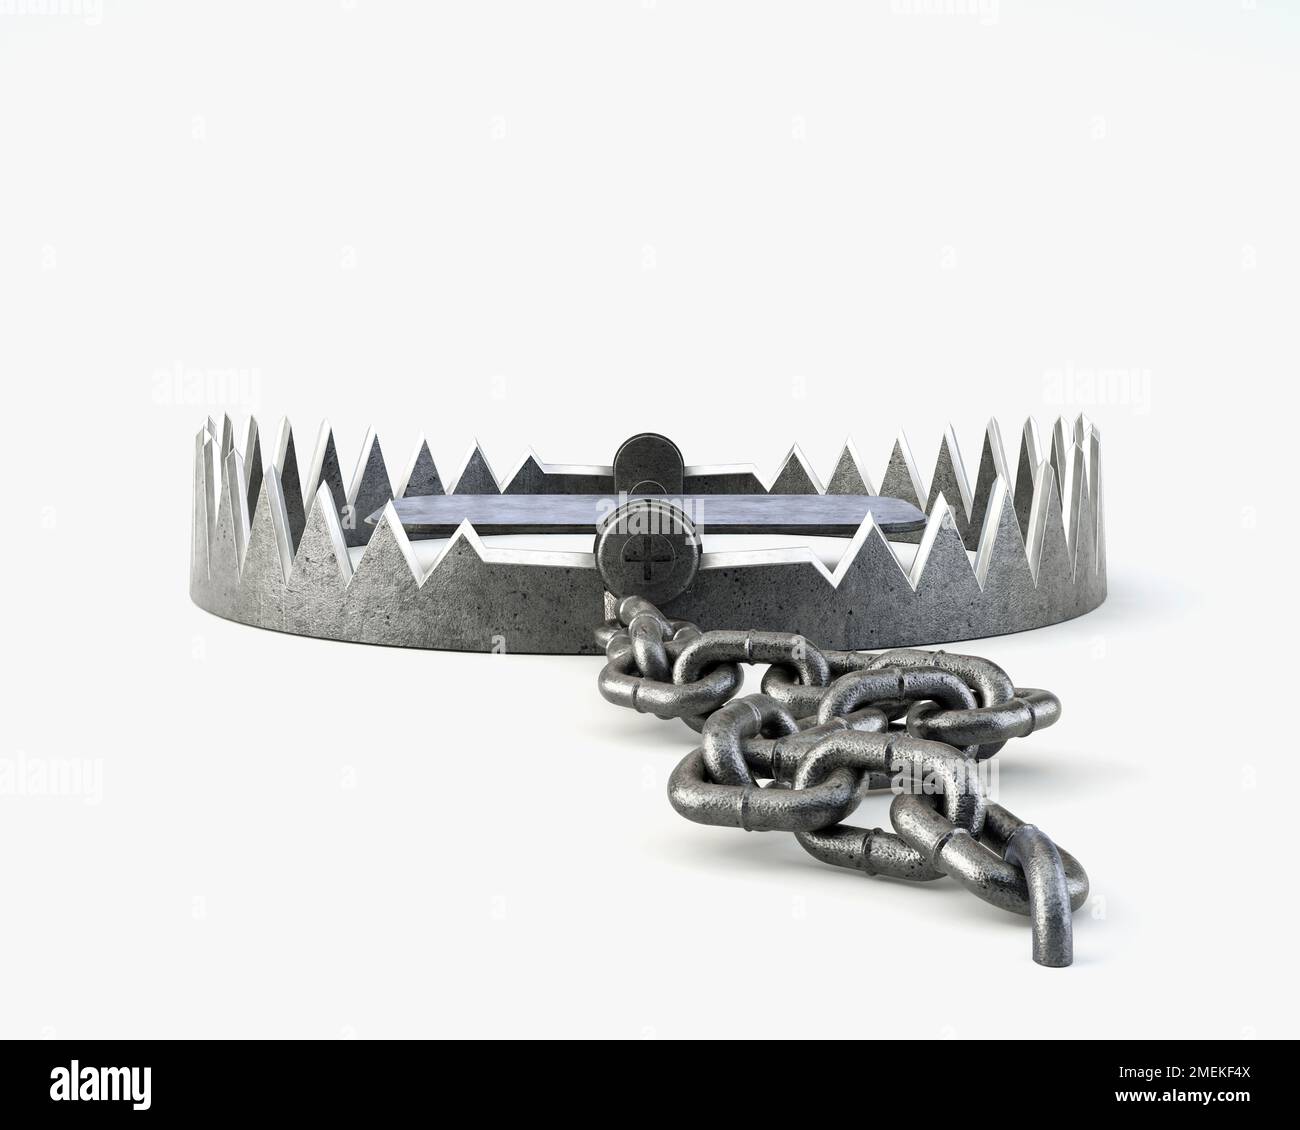 https://c8.alamy.com/comp/2MEKF4X/an-open-metal-animal-hunting-trap-attached-to-the-ground-with-a-metal-chain-on-an-isolated-studio-background-3d-render-2MEKF4X.jpg